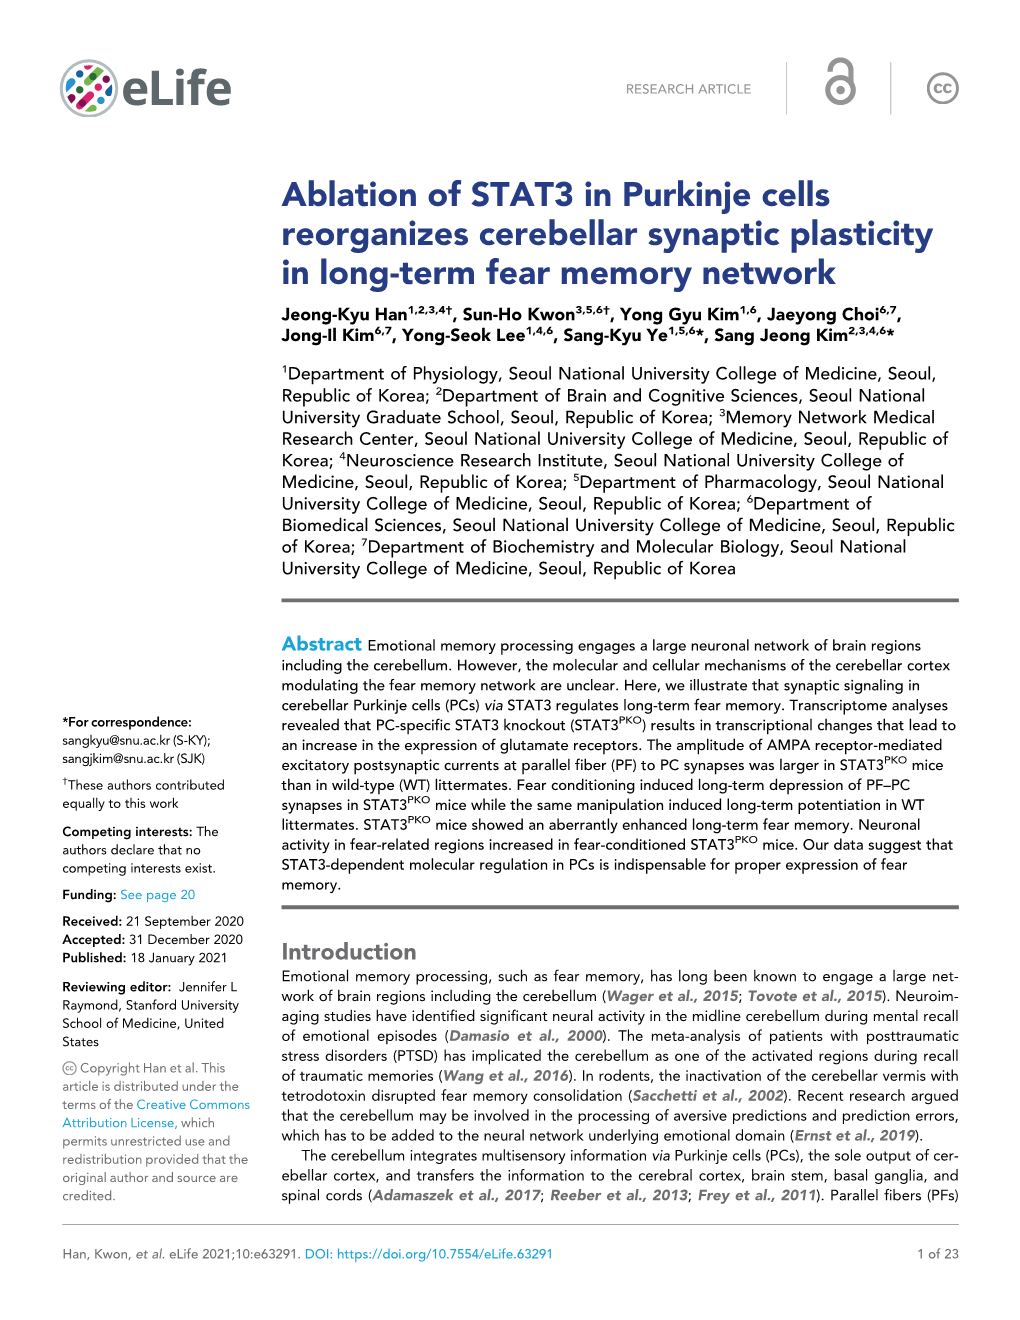 Ablation of STAT3 in Purkinje Cells Reorganizes Cerebellar Synaptic